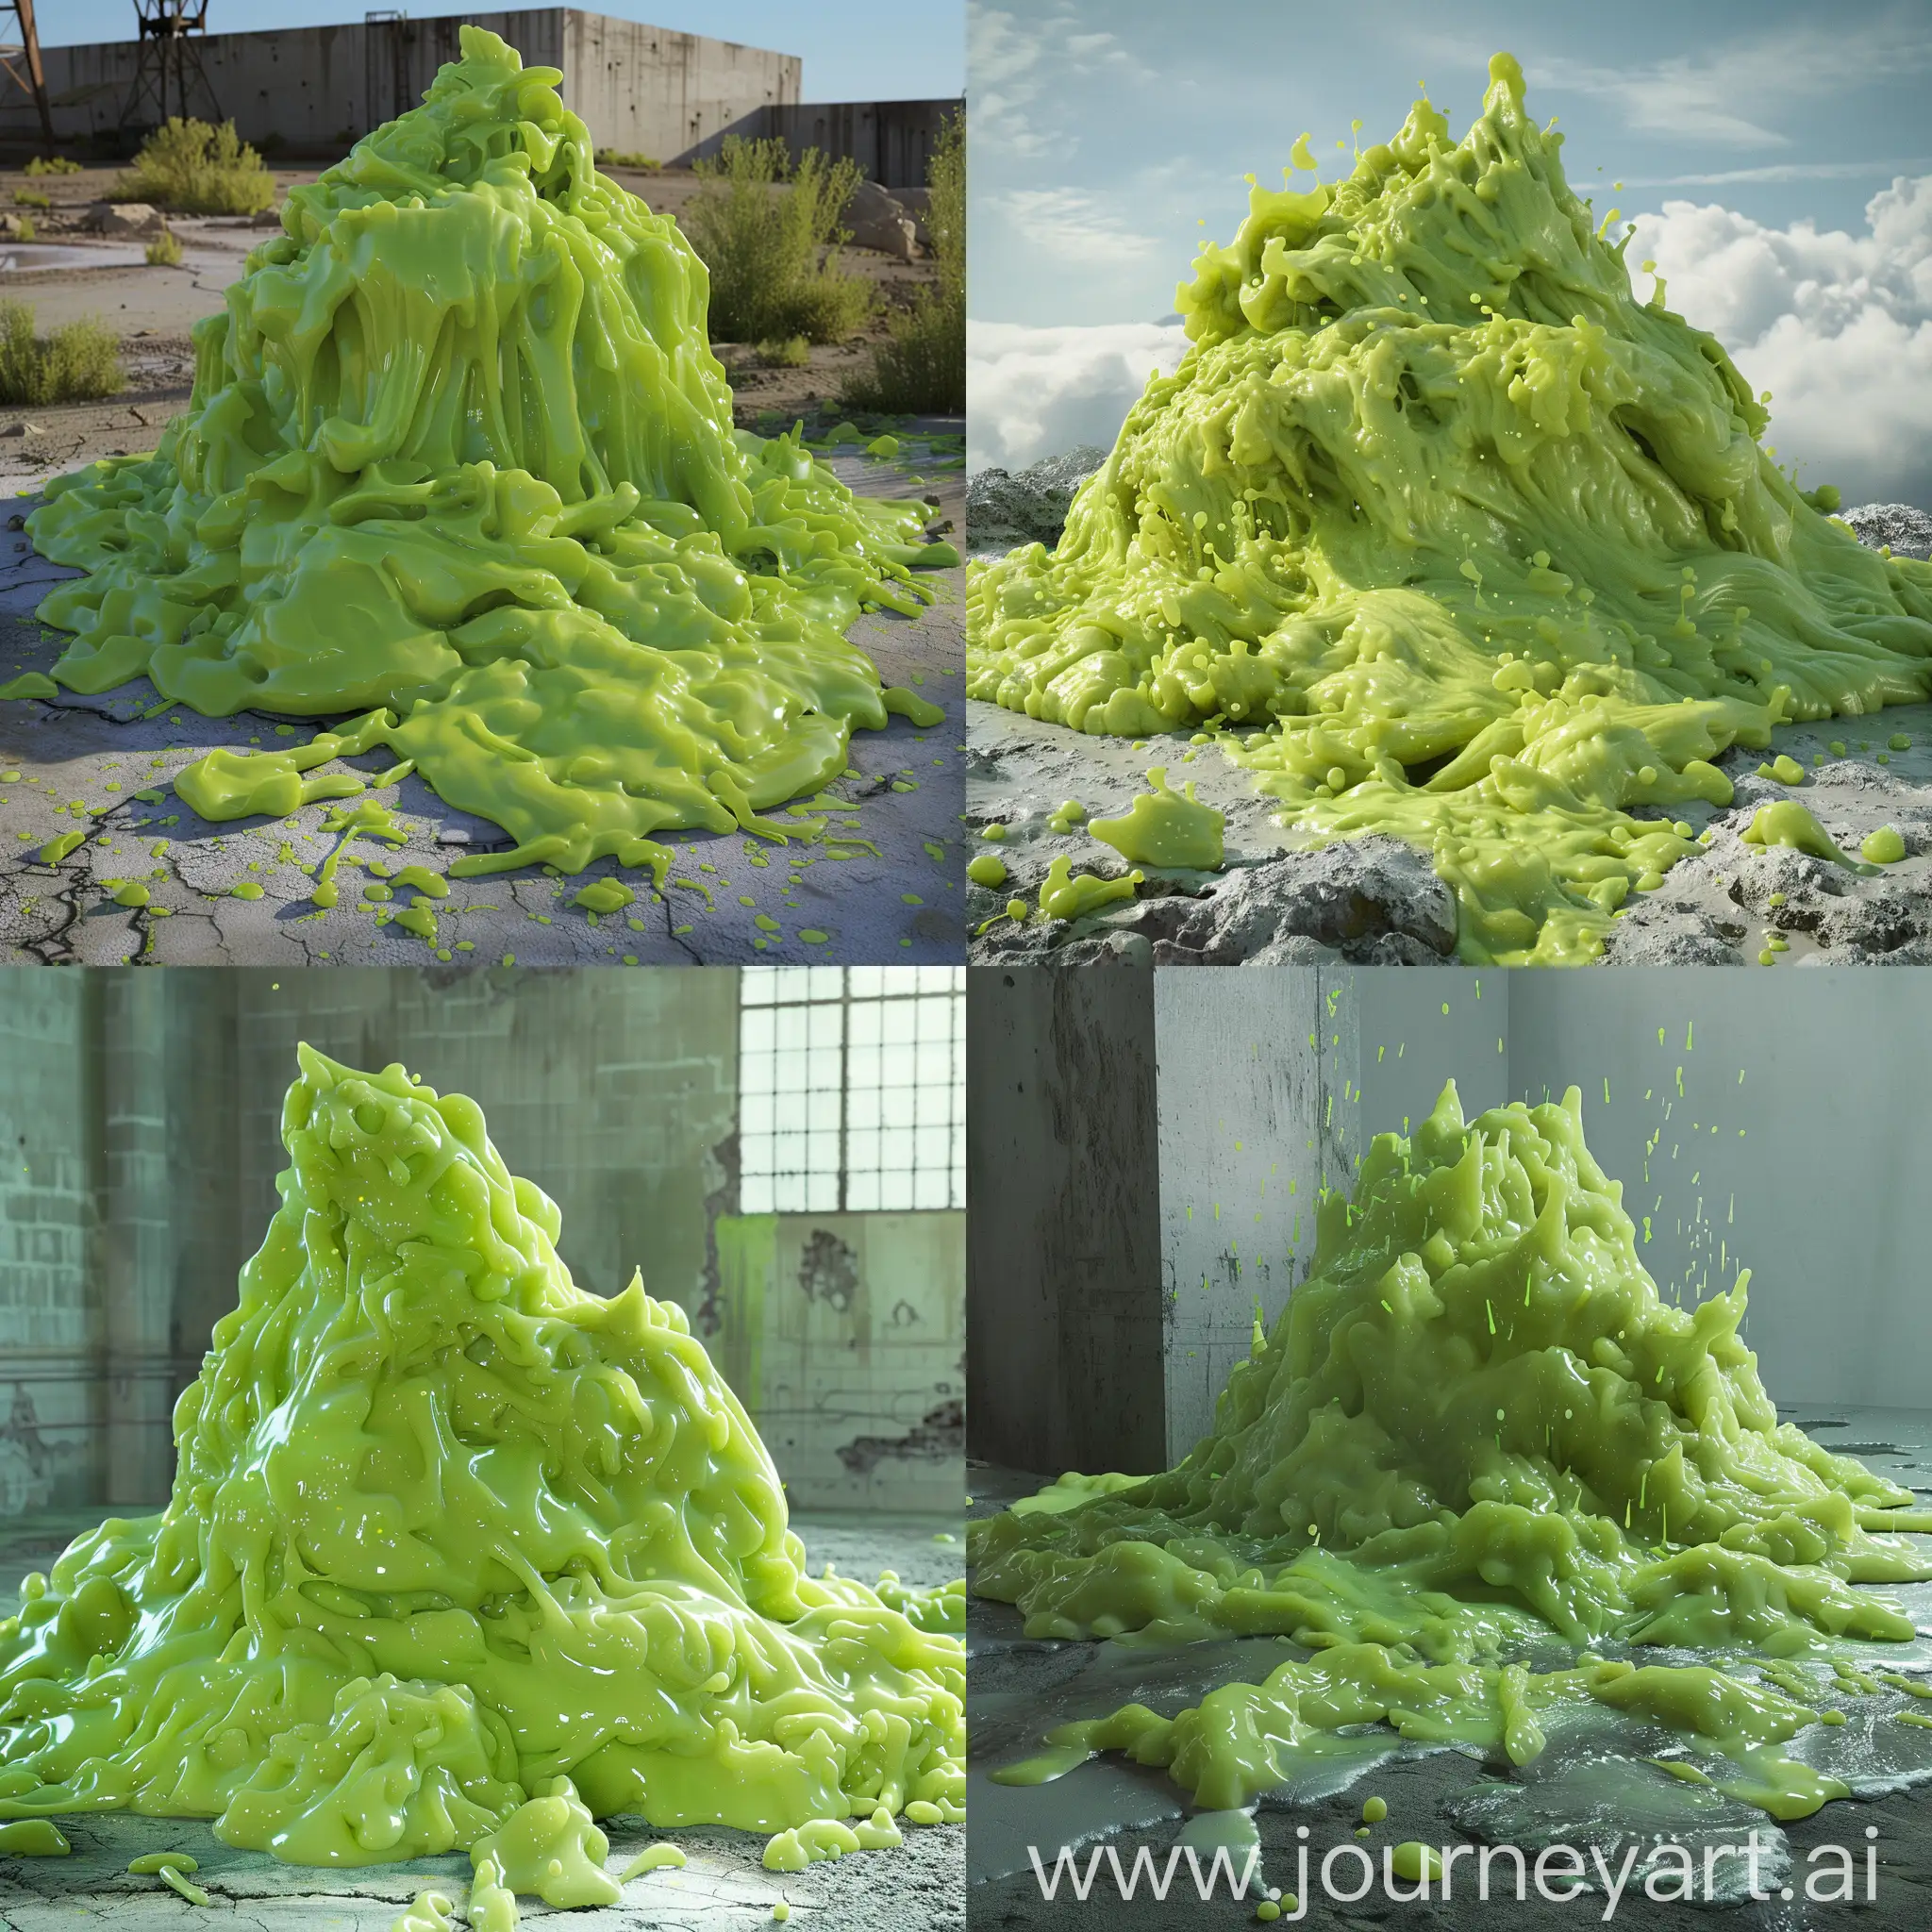 A huge pile of lime green slime on bedrock, pool of green slime, a lime green slime being, alive slime, steampunk, detailed, 3D photo, photorealistic.